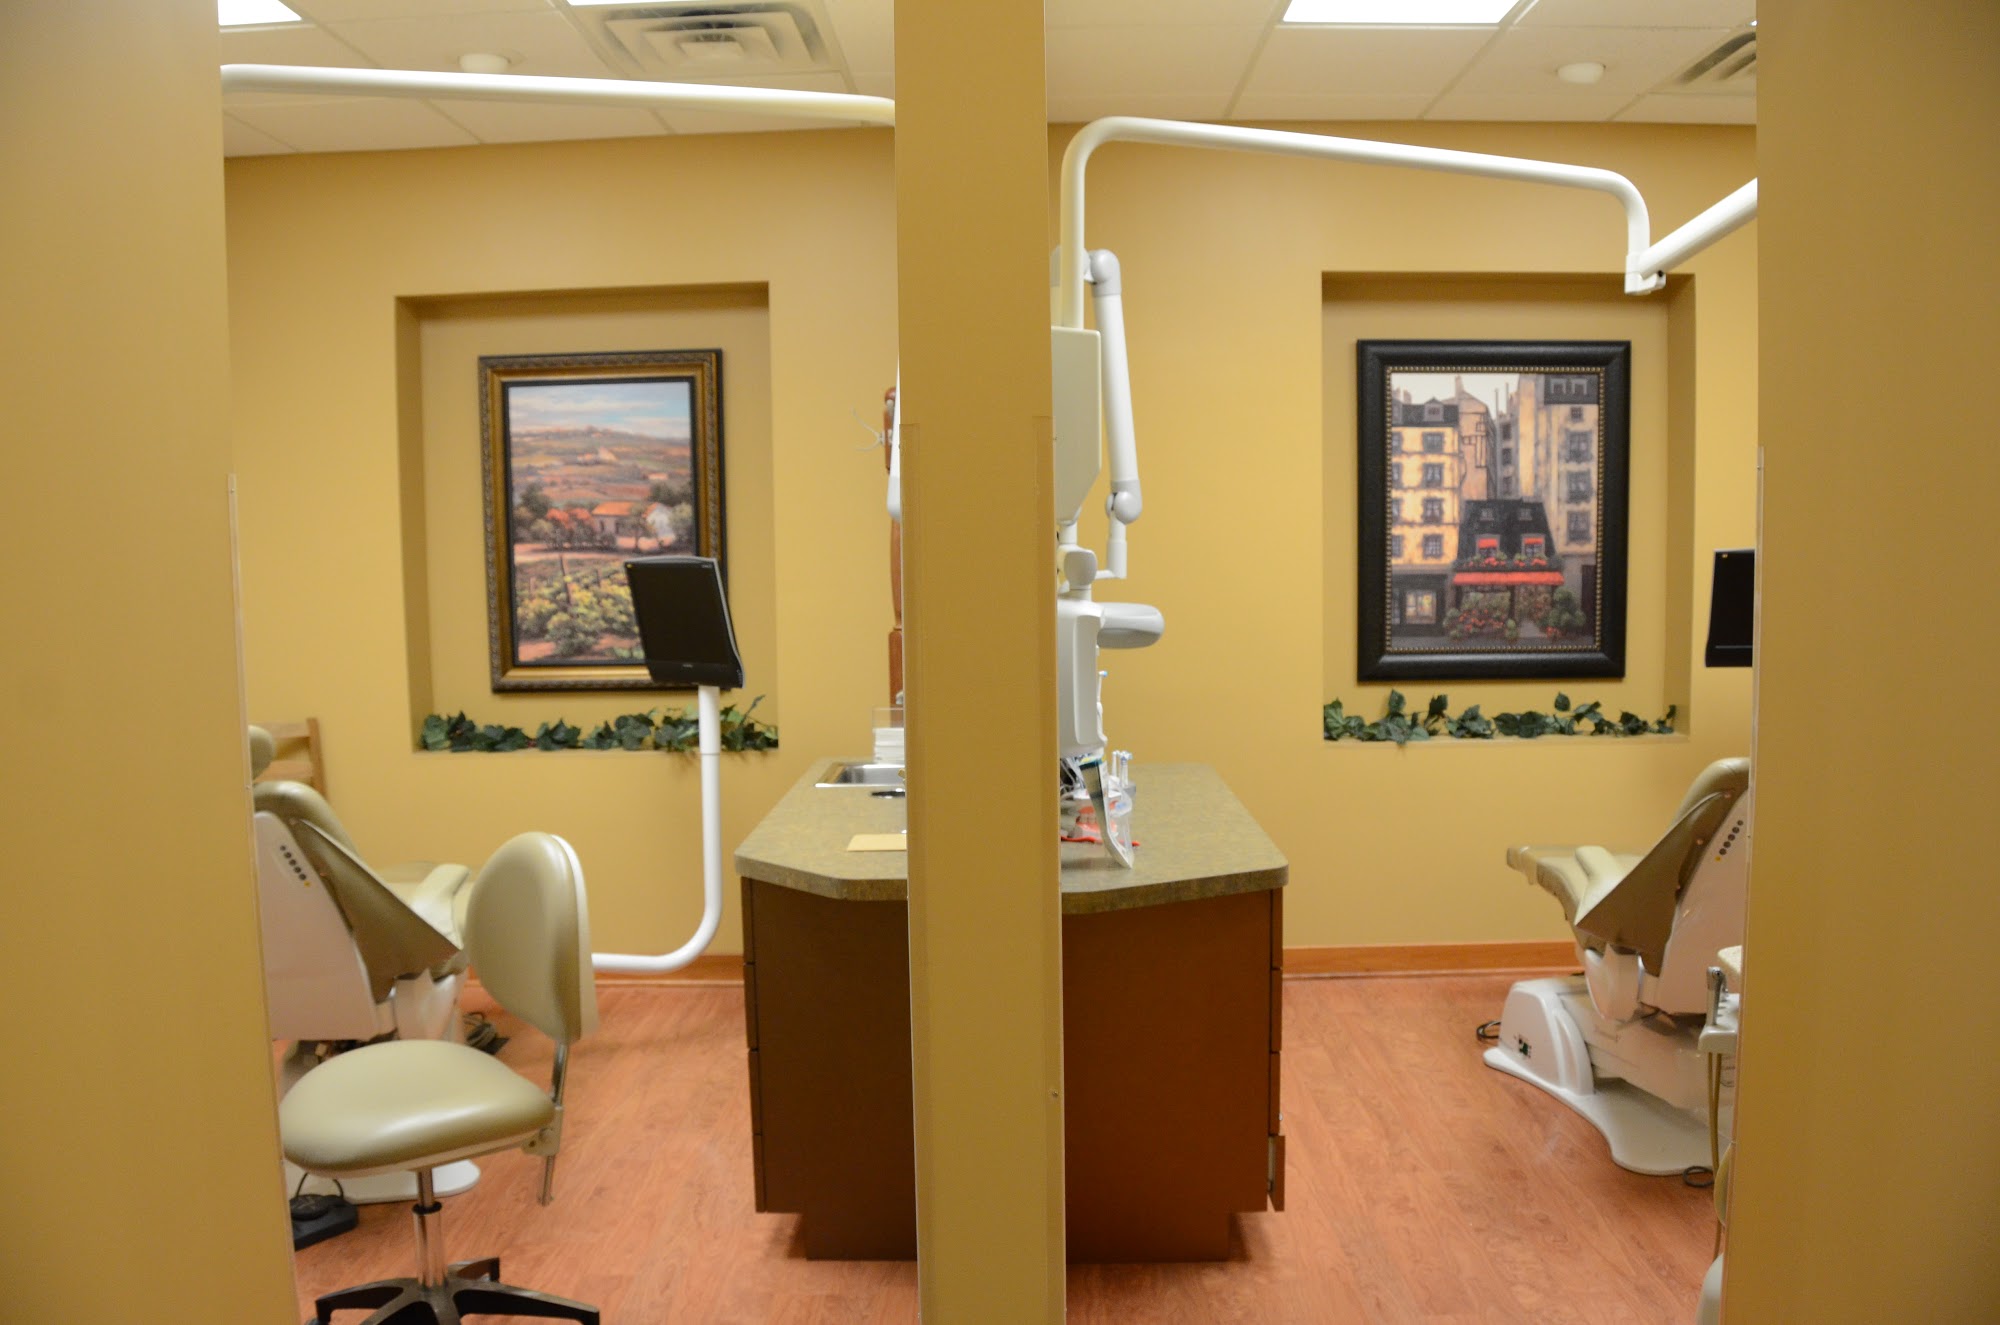 Michael J. Whitted DDS